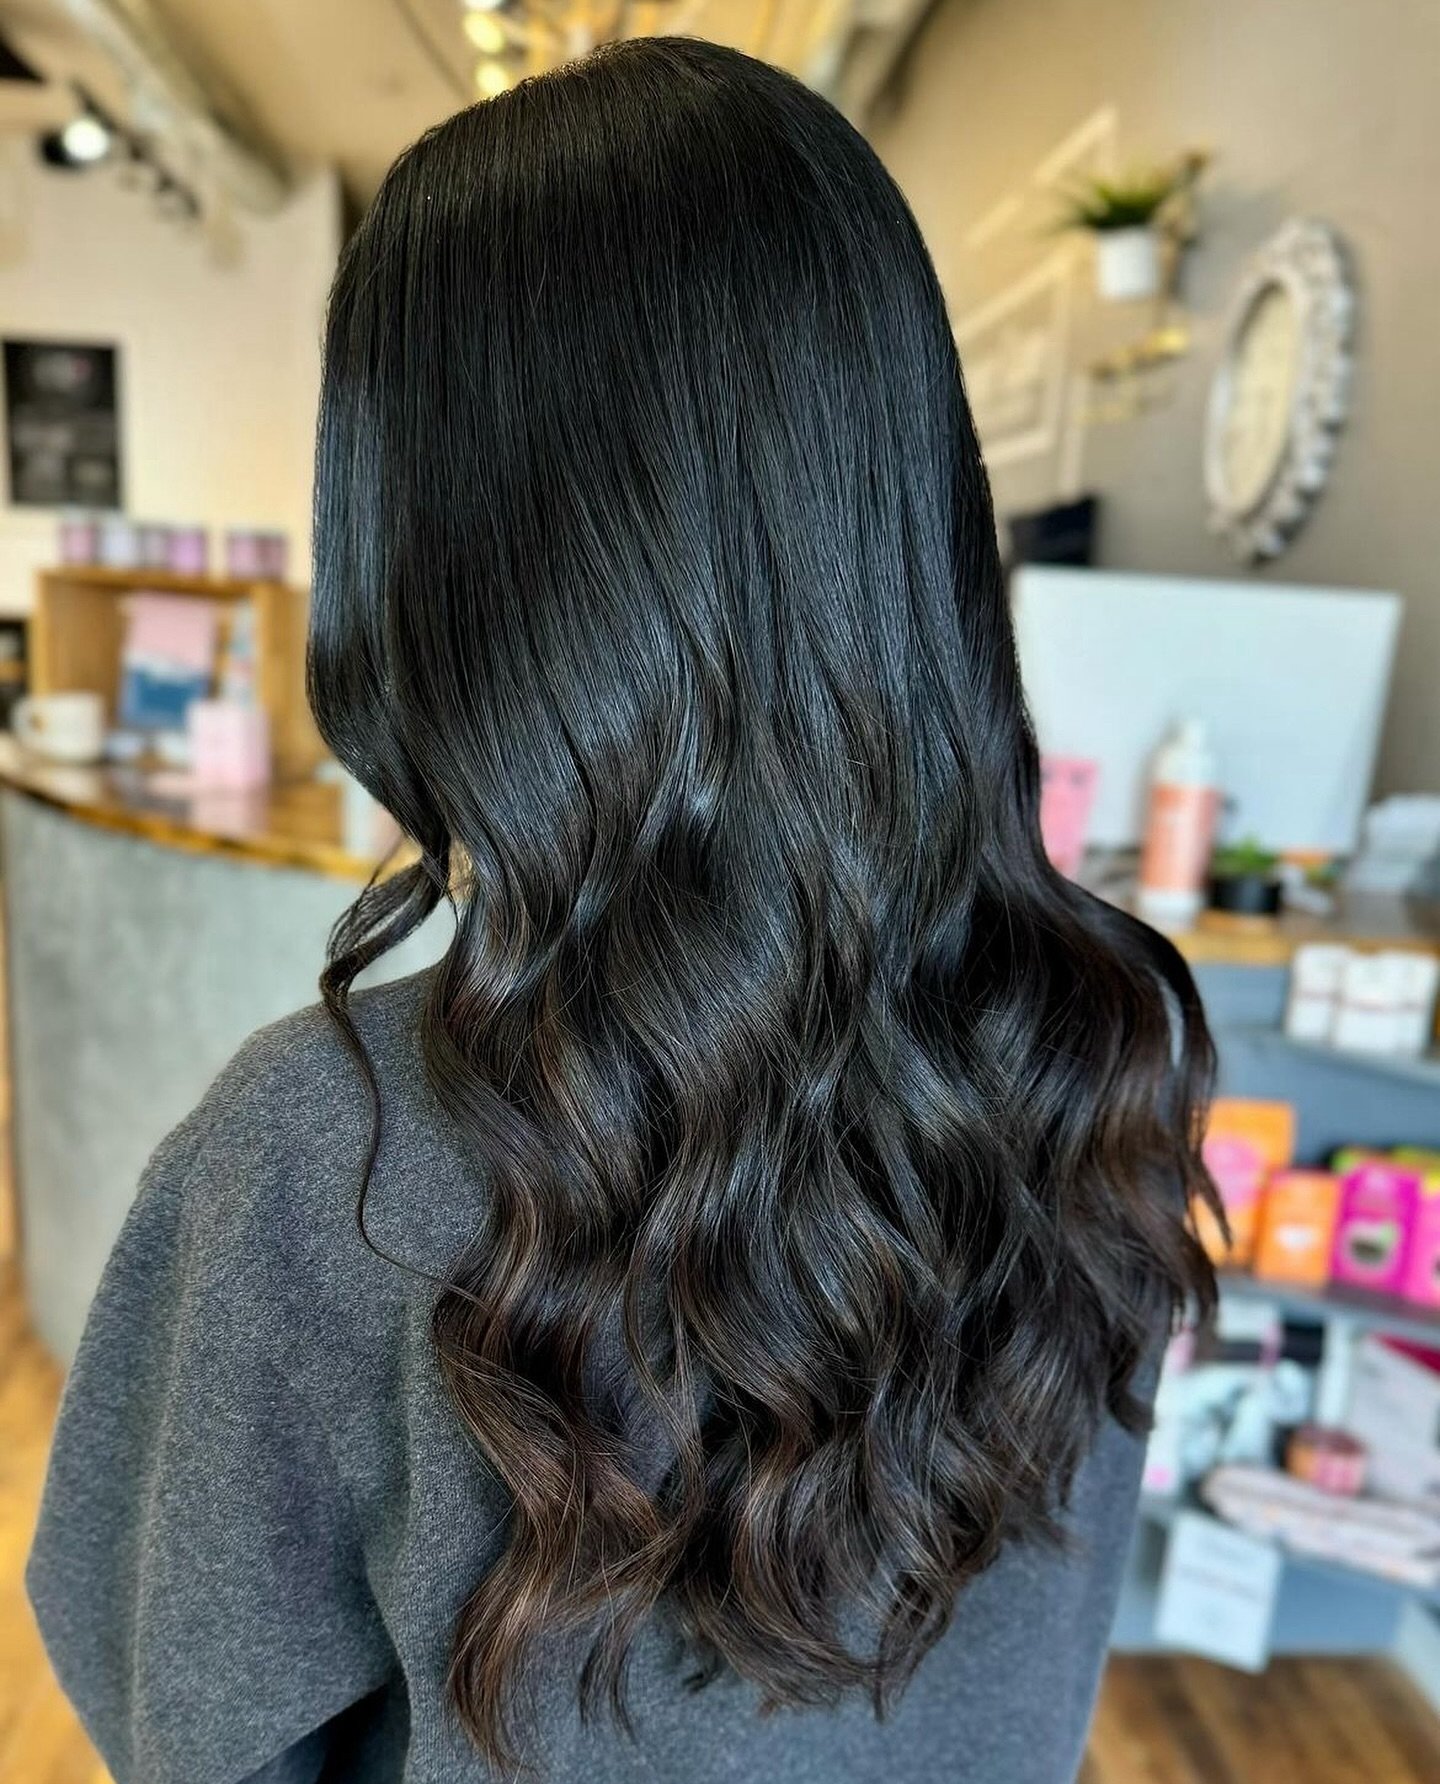 There is just so much beauty walking in and out of our salon lately! Thank you for trusting us with your Spring hair goals 🙏

📷 @emilylawhair